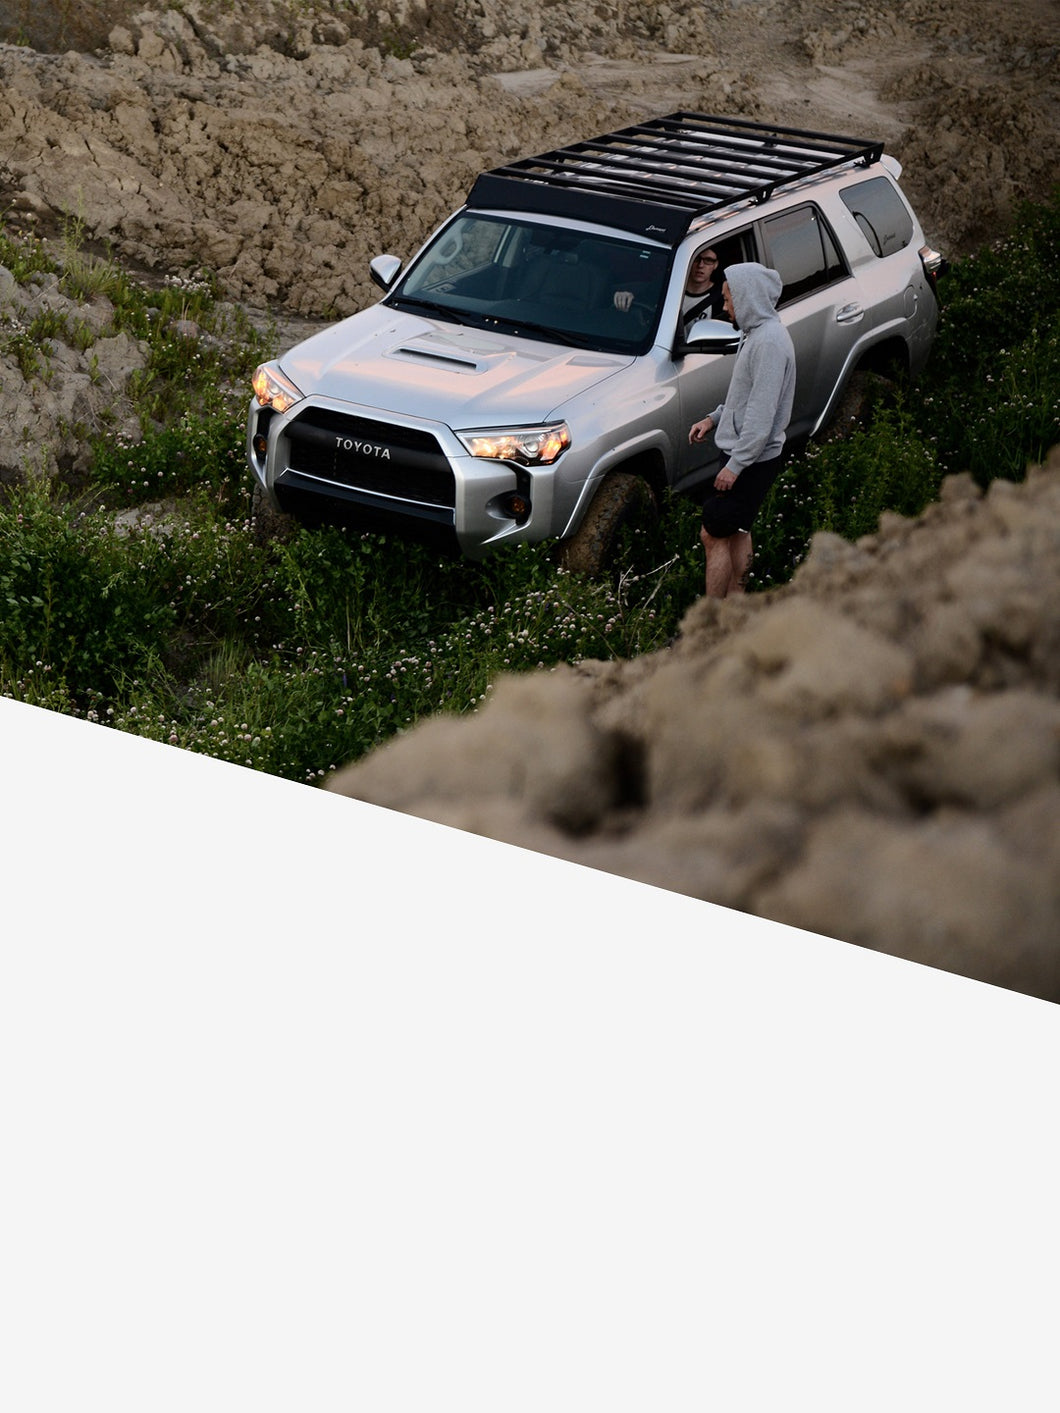 Pictured is a silver Toyota SUV, specifically a 5th Gen 4Runner with the assembled 10-20 4Runner 5th Gen Modular Roof Rack on the car roof. The perfect fit and most compatible choice of modular roof rack for your Toyota 4Runner 5th Gen SUV! Available for sale by SMRT Tent in Edmonton, Canada.